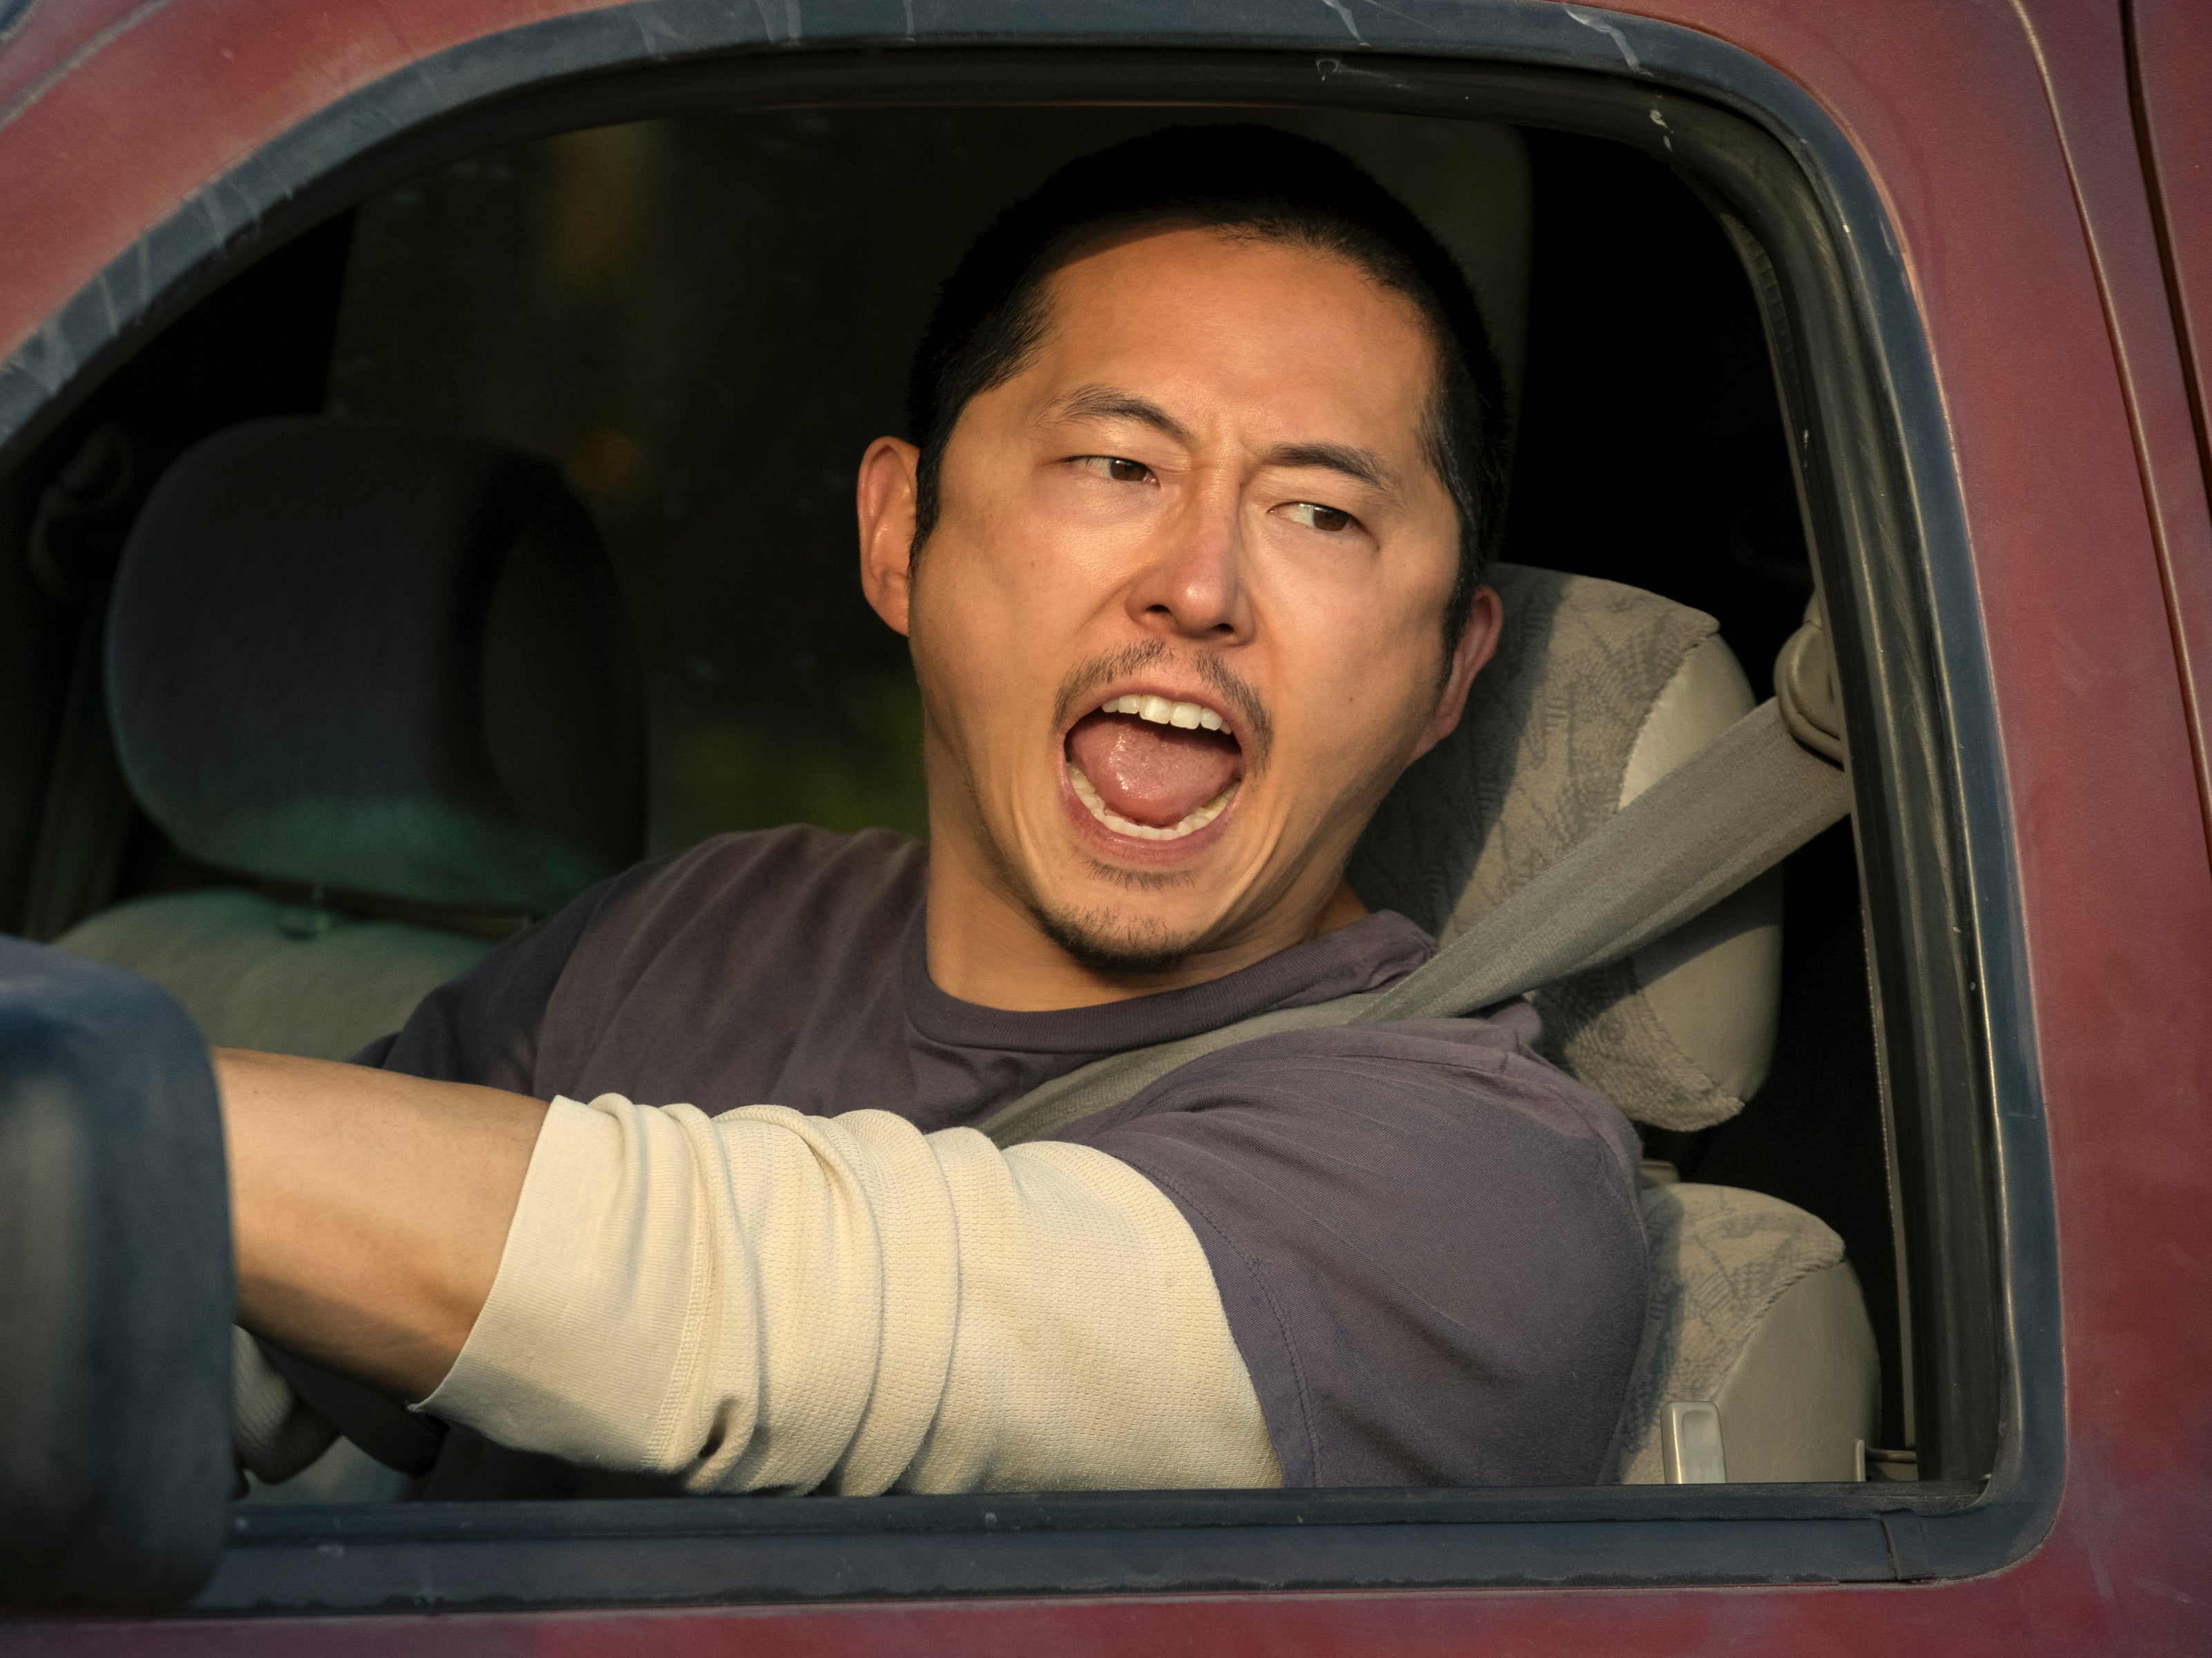 Steven Yeun in ‘Beef’, who seems capable of nailing all genres